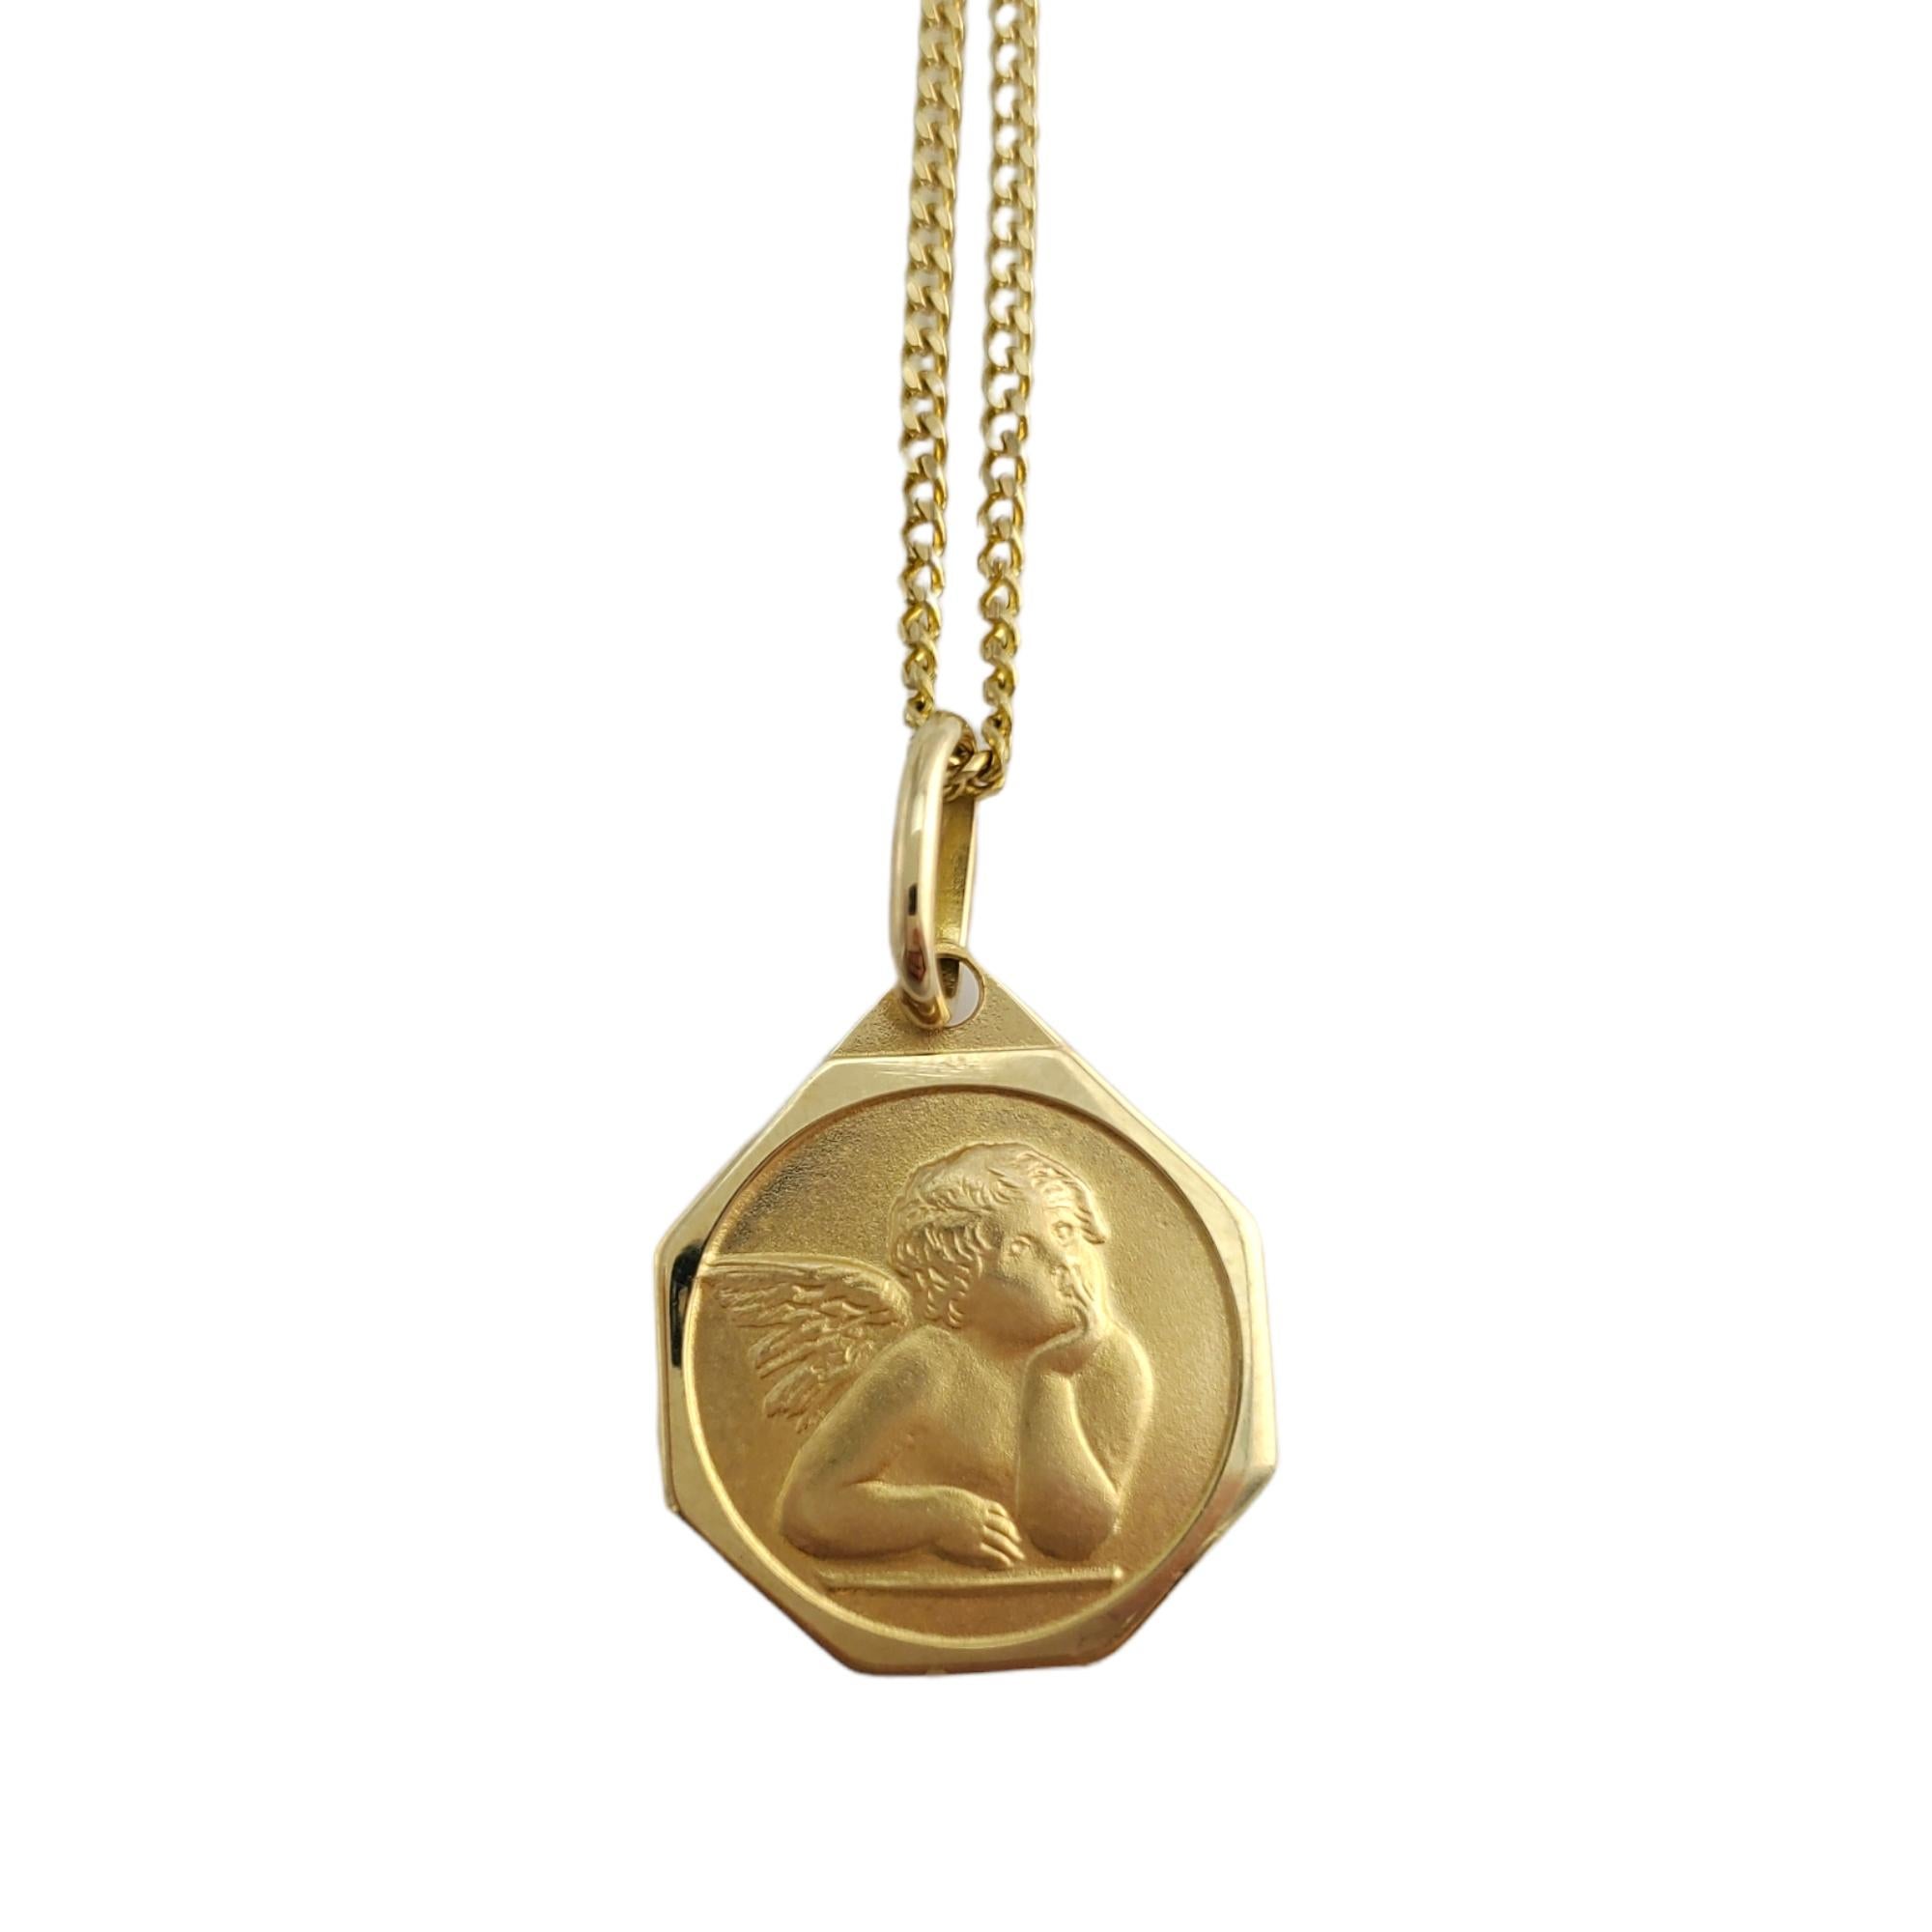 14K Yellow Gold Chain With Guardian Angel Pendant

This beautifully detailed piece features a octagonal pendant hanging from a 14K yellow gold chain.

Charm size: 18.1 mm X 15.2 mm 

Chain Length: 18 in.

Weight: 5.0 g/ 3.2 dwt

Hallmark: AP KT 14